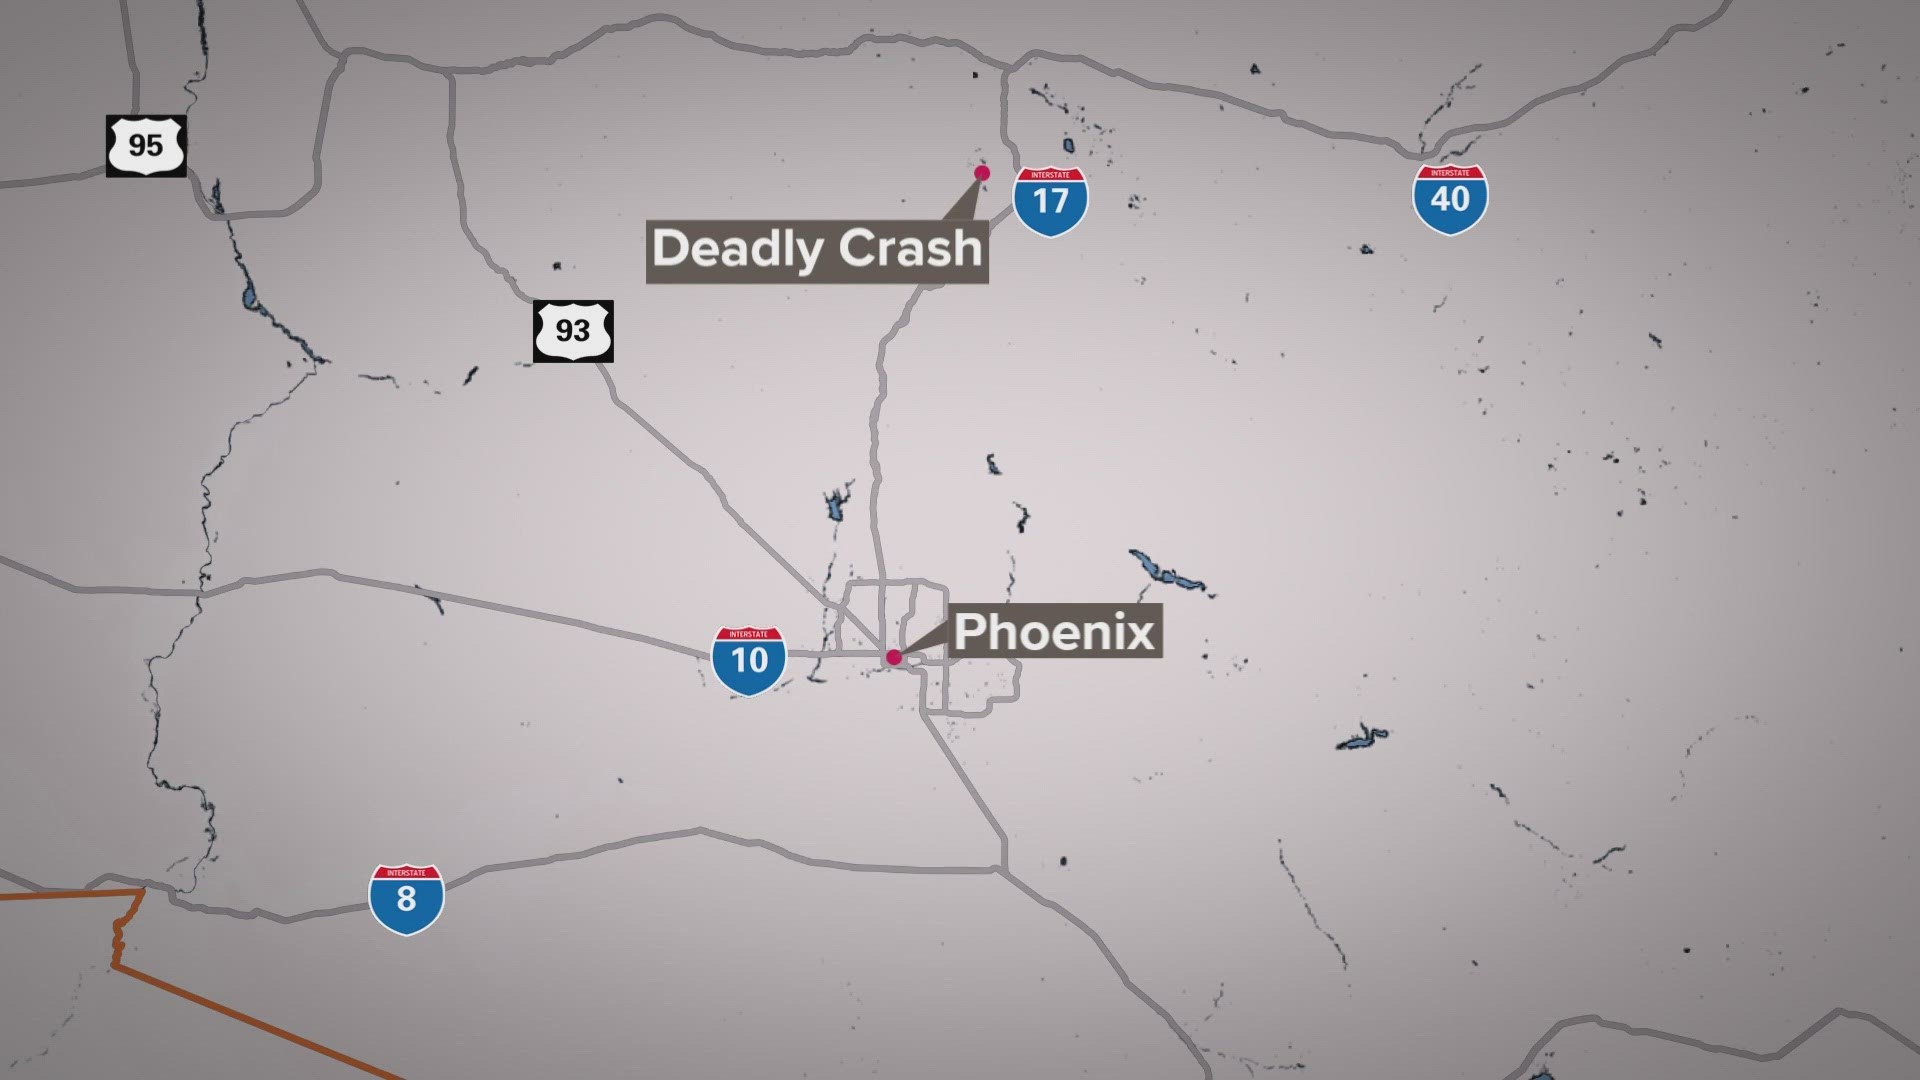 A two-car crash on SR-179 near Sedona resulted in the death of both drivers and minor injuries for one passenger, according to the Arizona Department of Public Safet